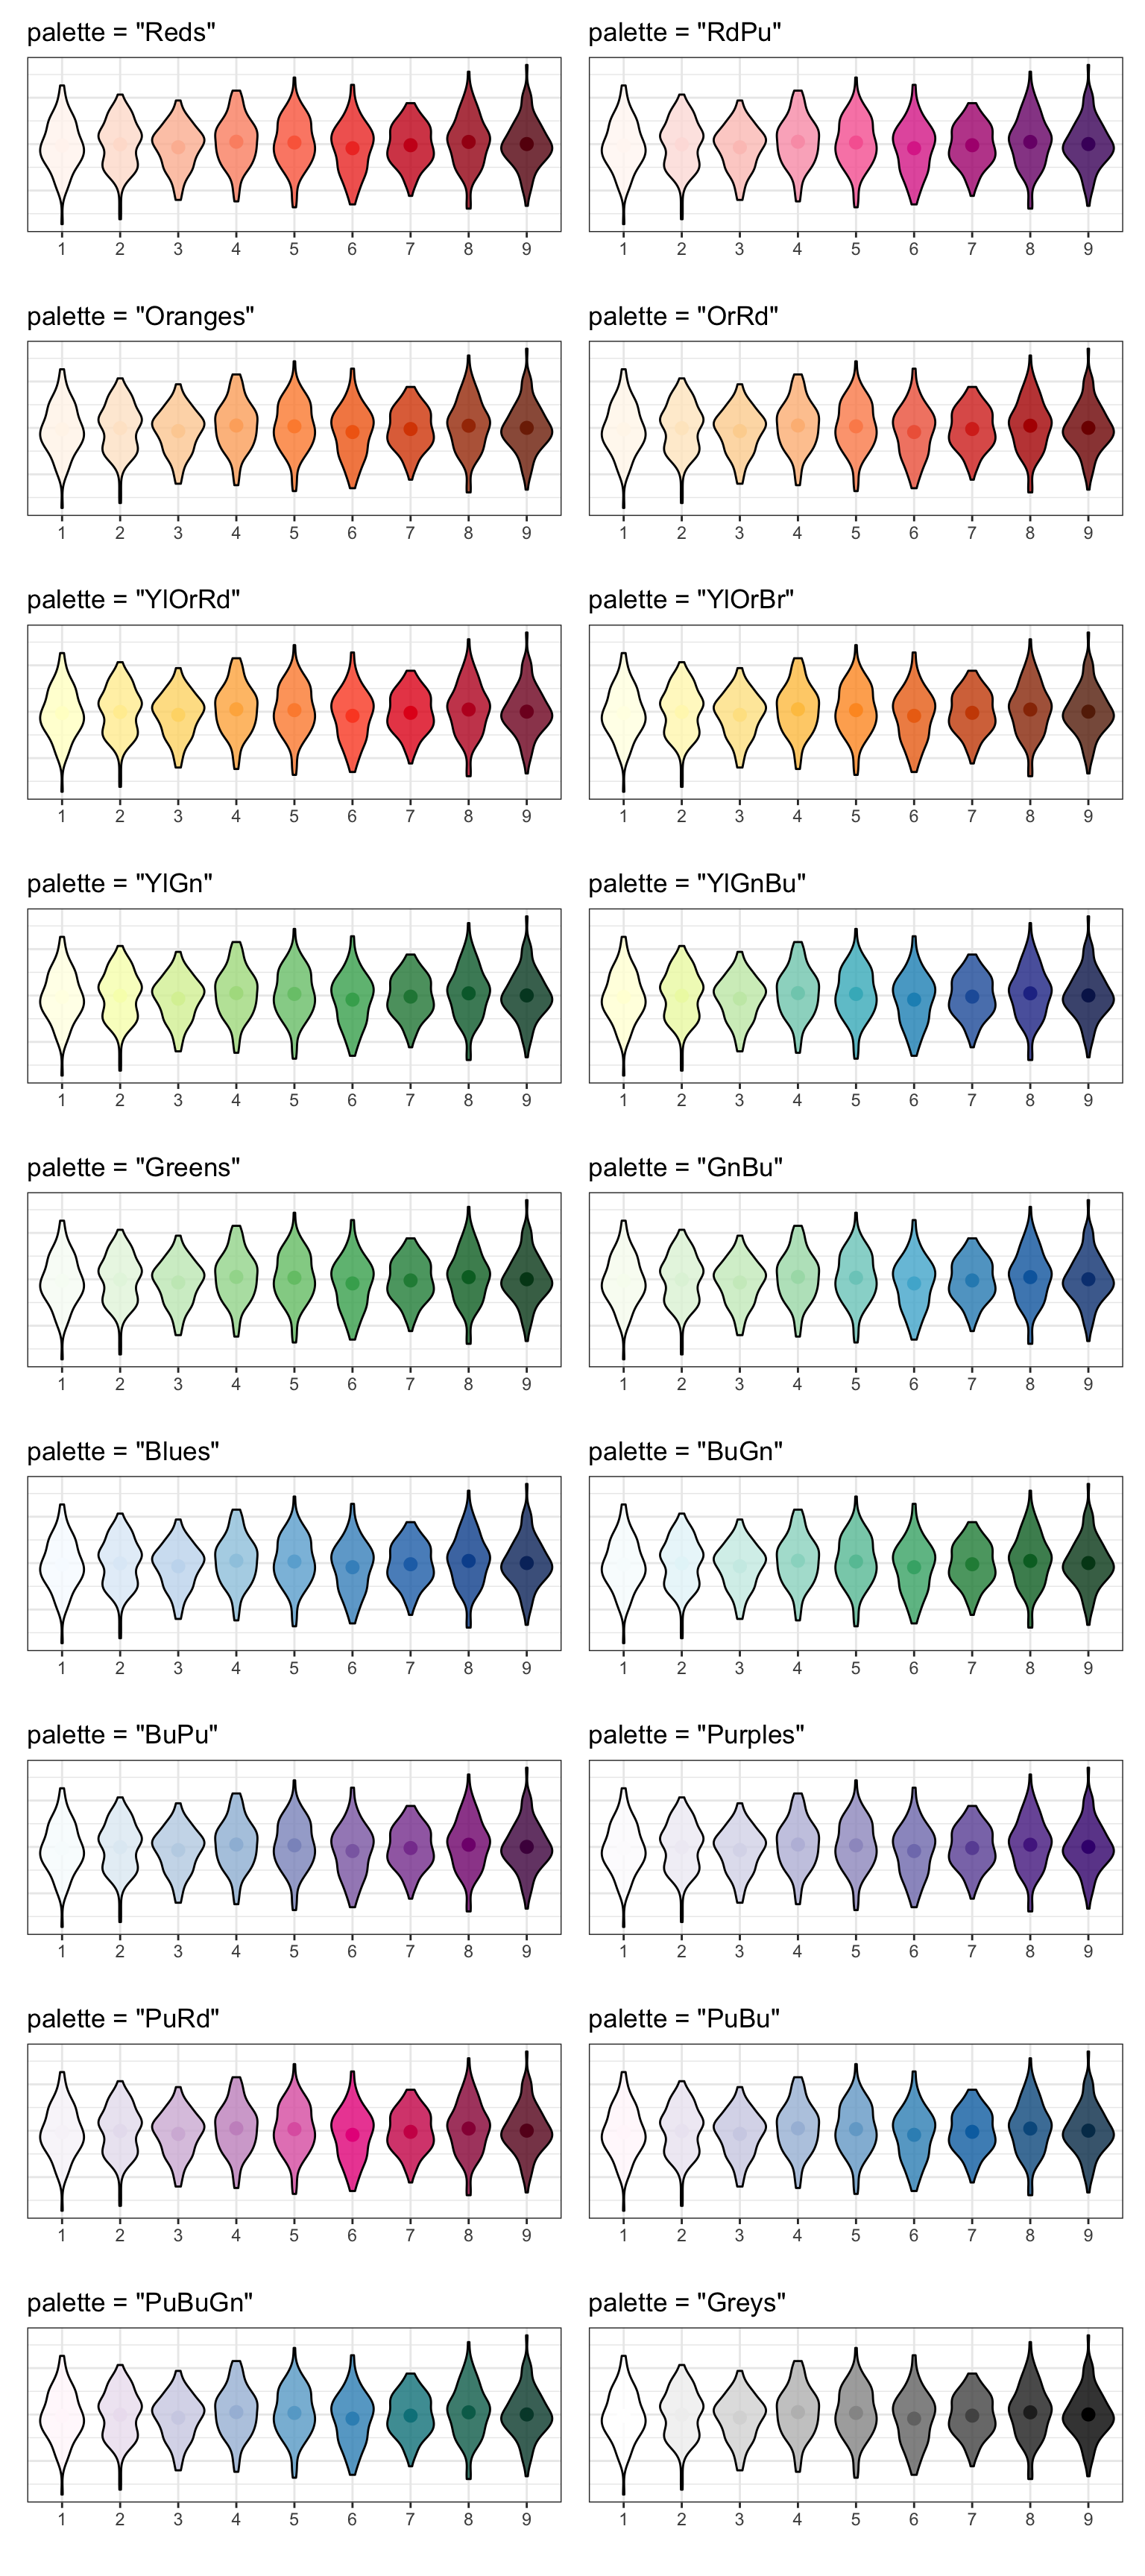 Sequential brewer palettes.